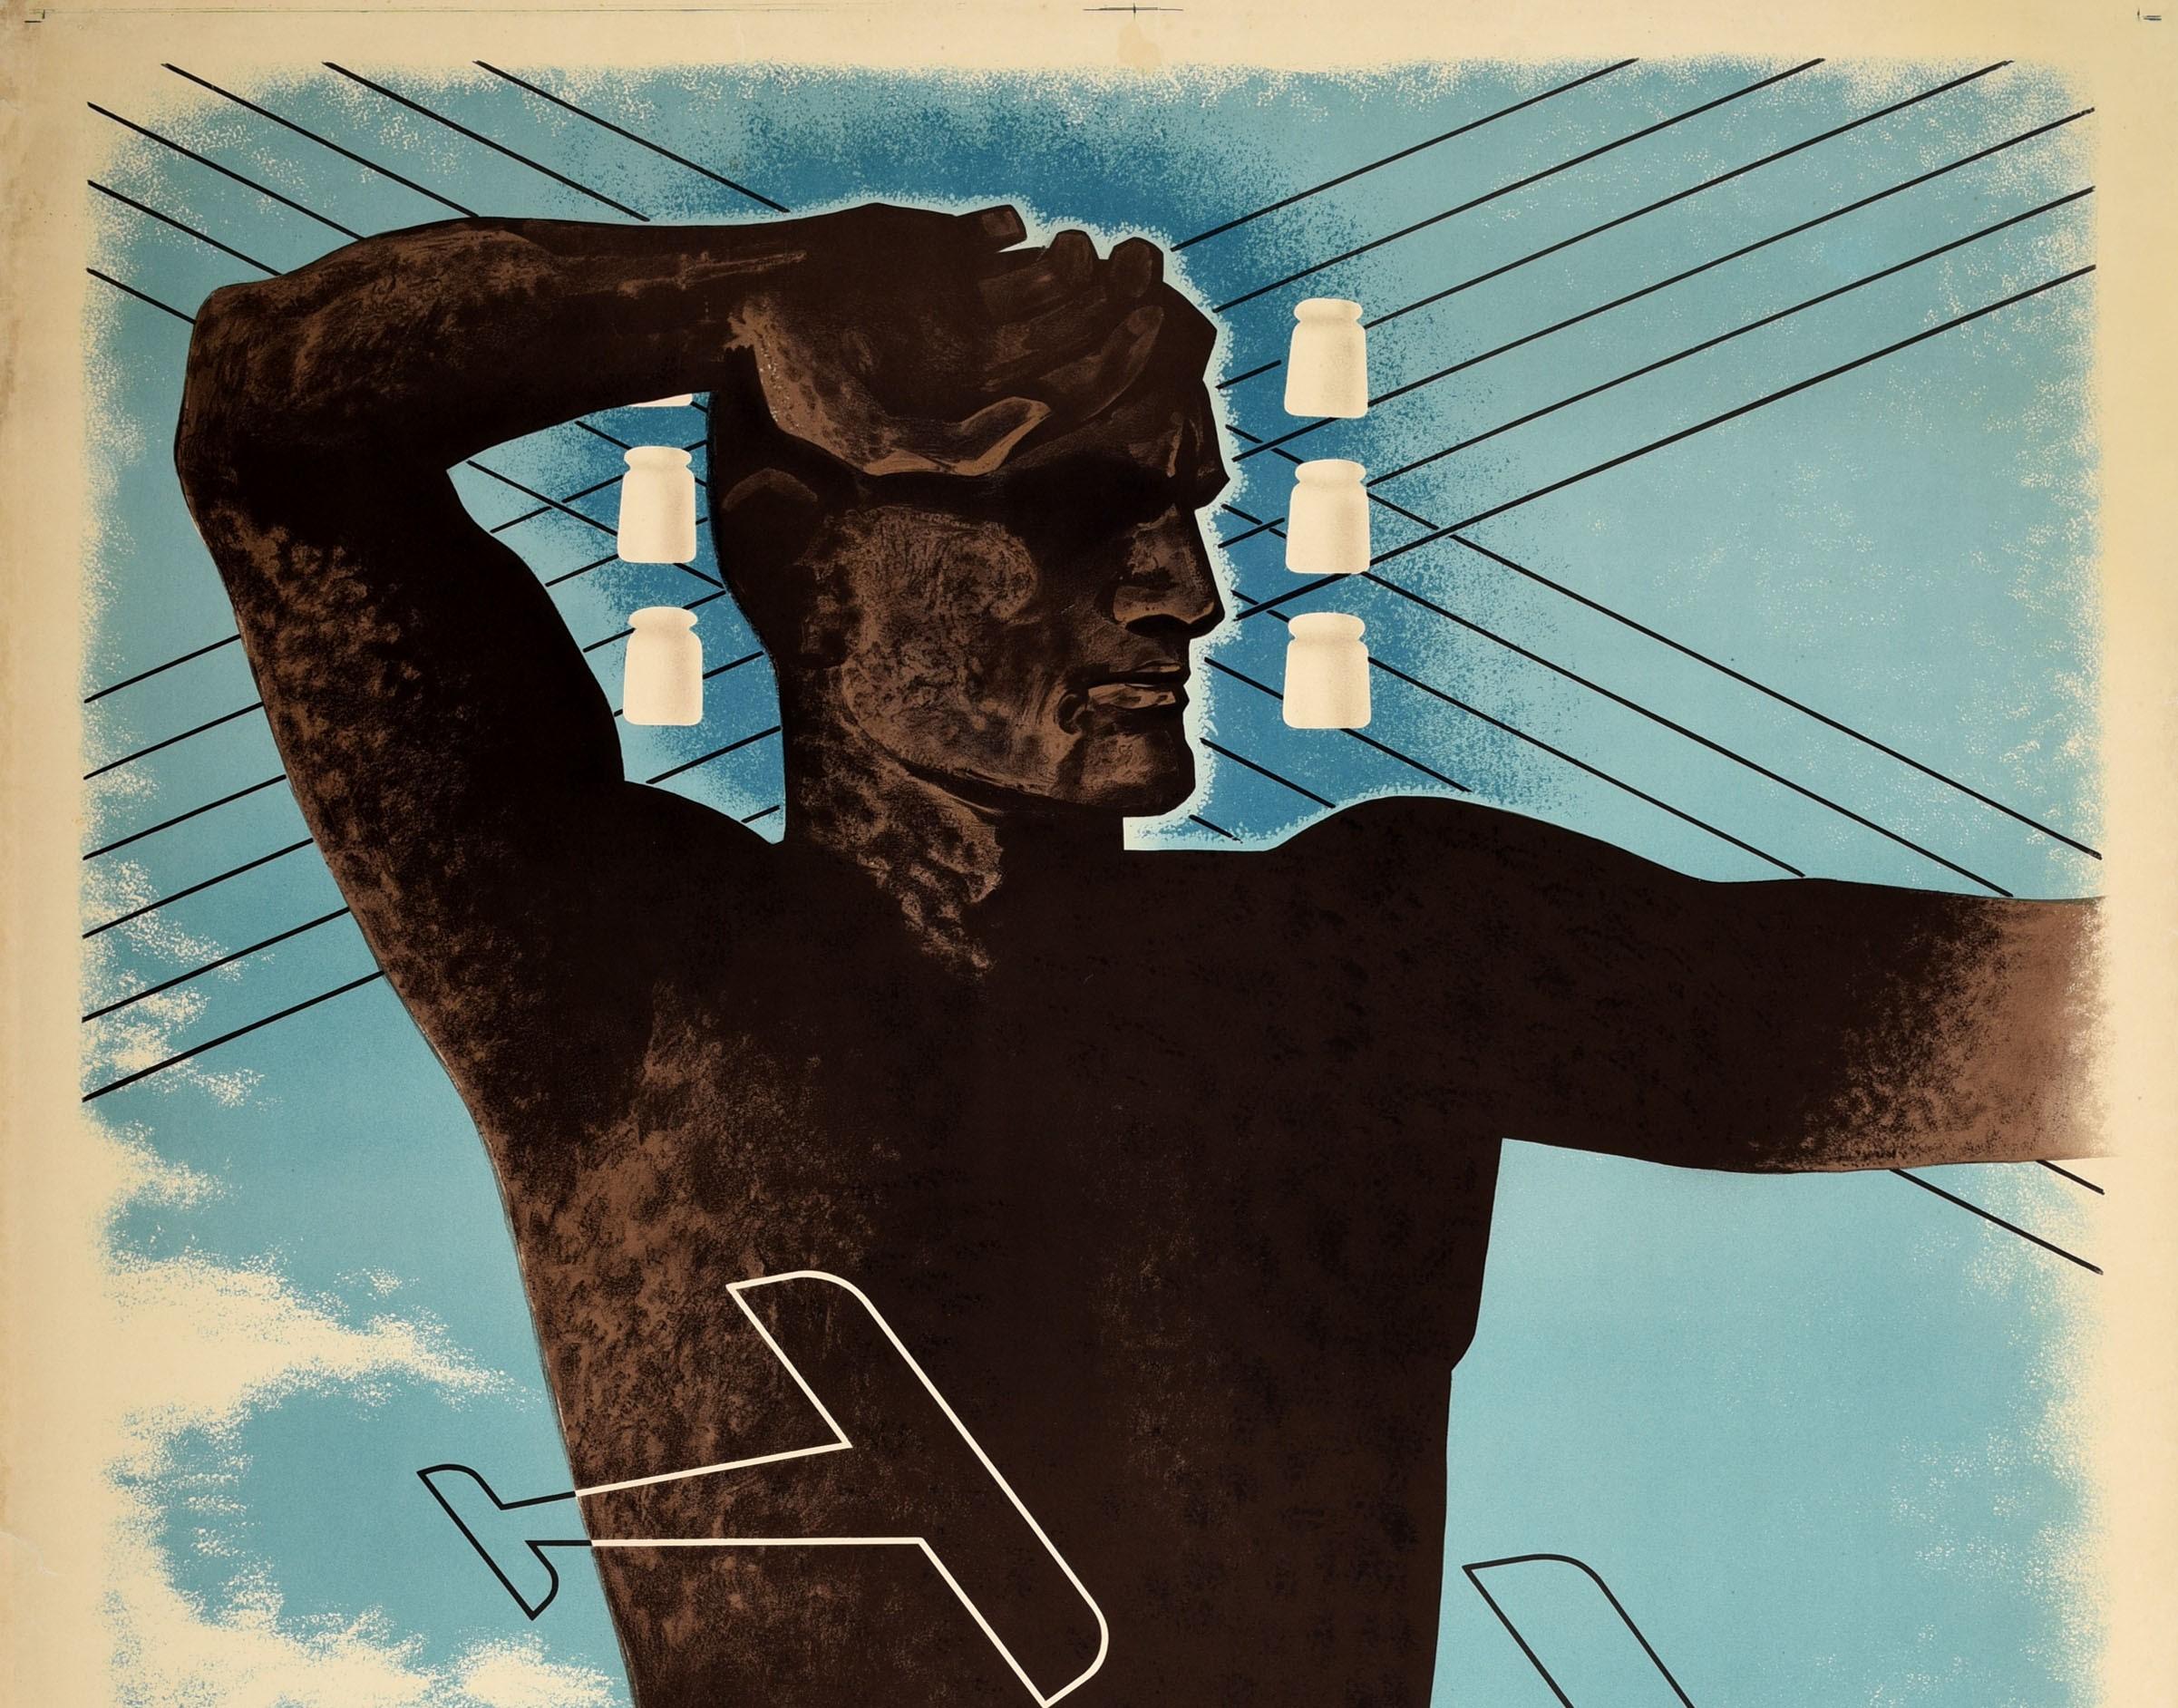 Original vintage newspaper advertising poster for Der Mittag Uberall featuring an Art Deco design depicting the figure of a man against a blue shaded sky background with crossed electricity lines above and outlines of planes flying across the